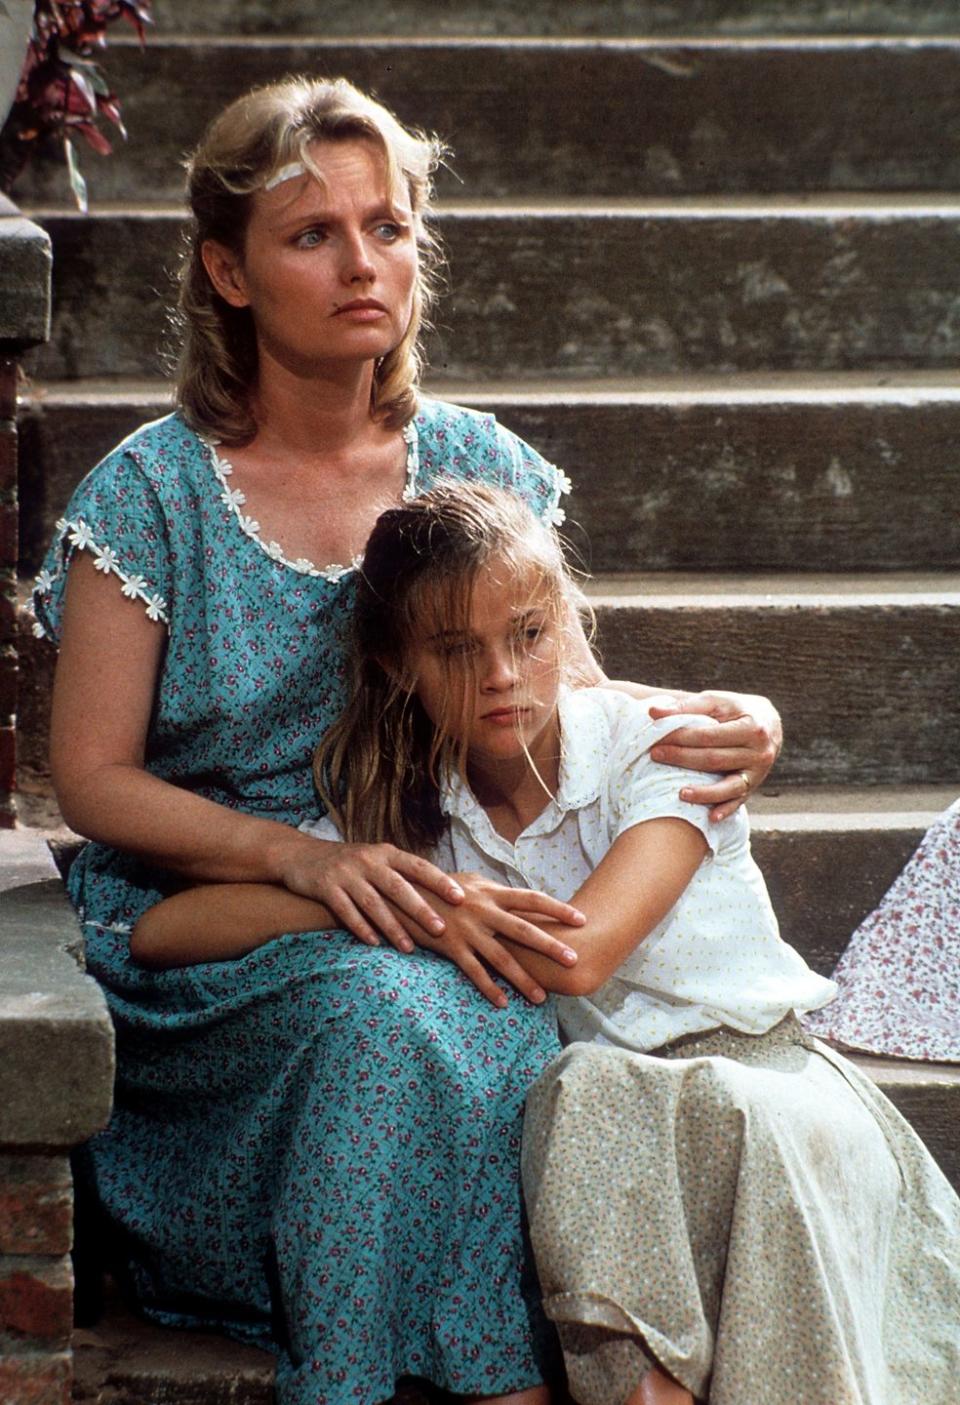 tess harper and reese witherspoon in 'the man in the moon'